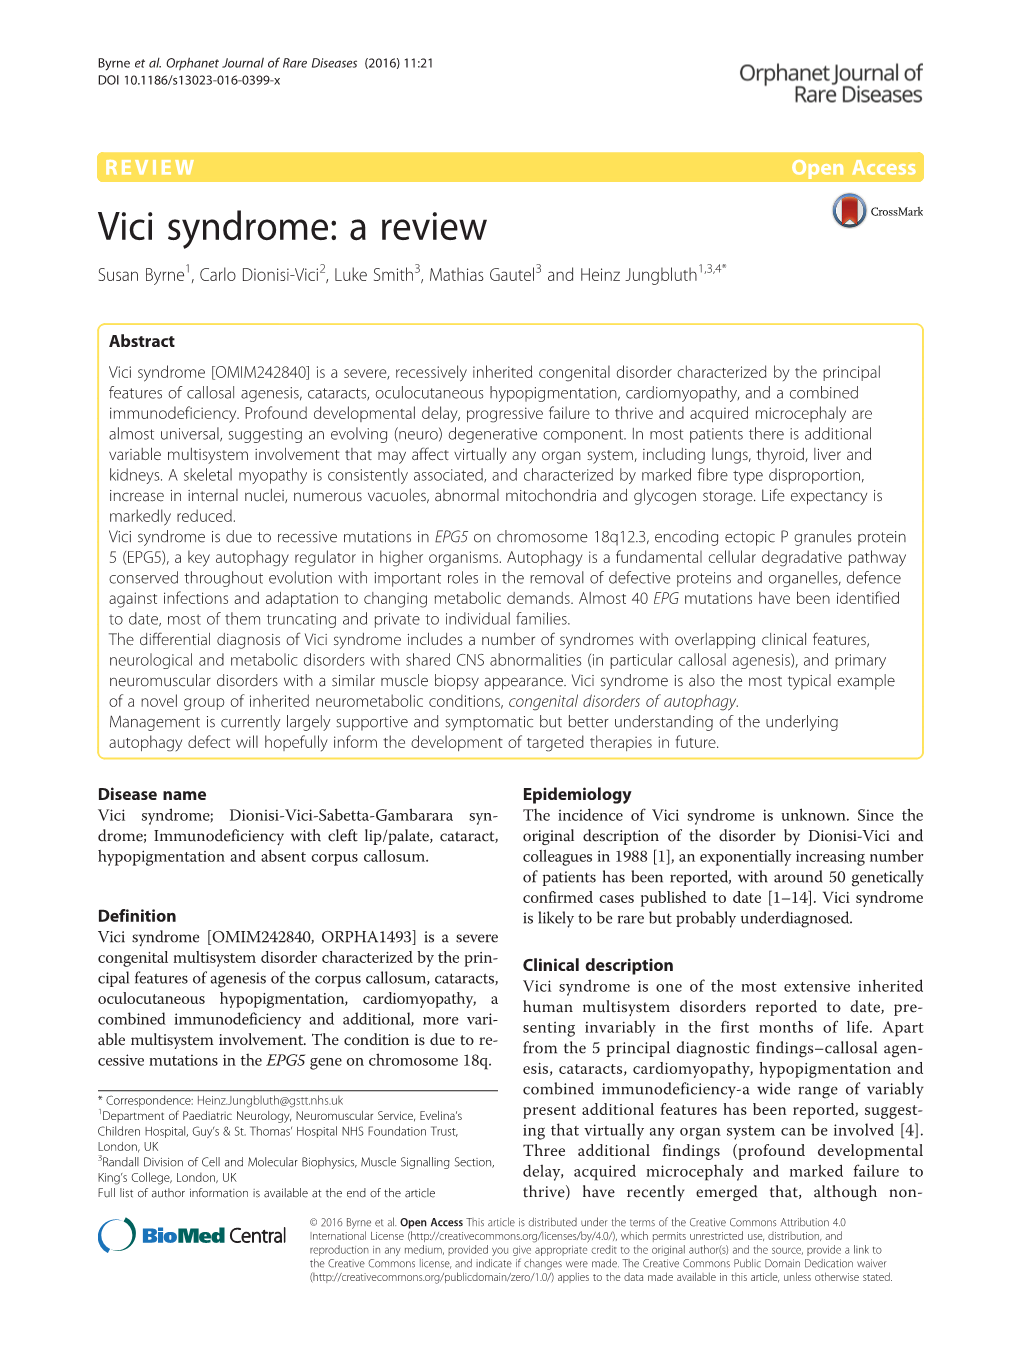 Vici Syndrome: a Review Susan Byrne1, Carlo Dionisi-Vici2, Luke Smith3, Mathias Gautel3 and Heinz Jungbluth1,3,4*